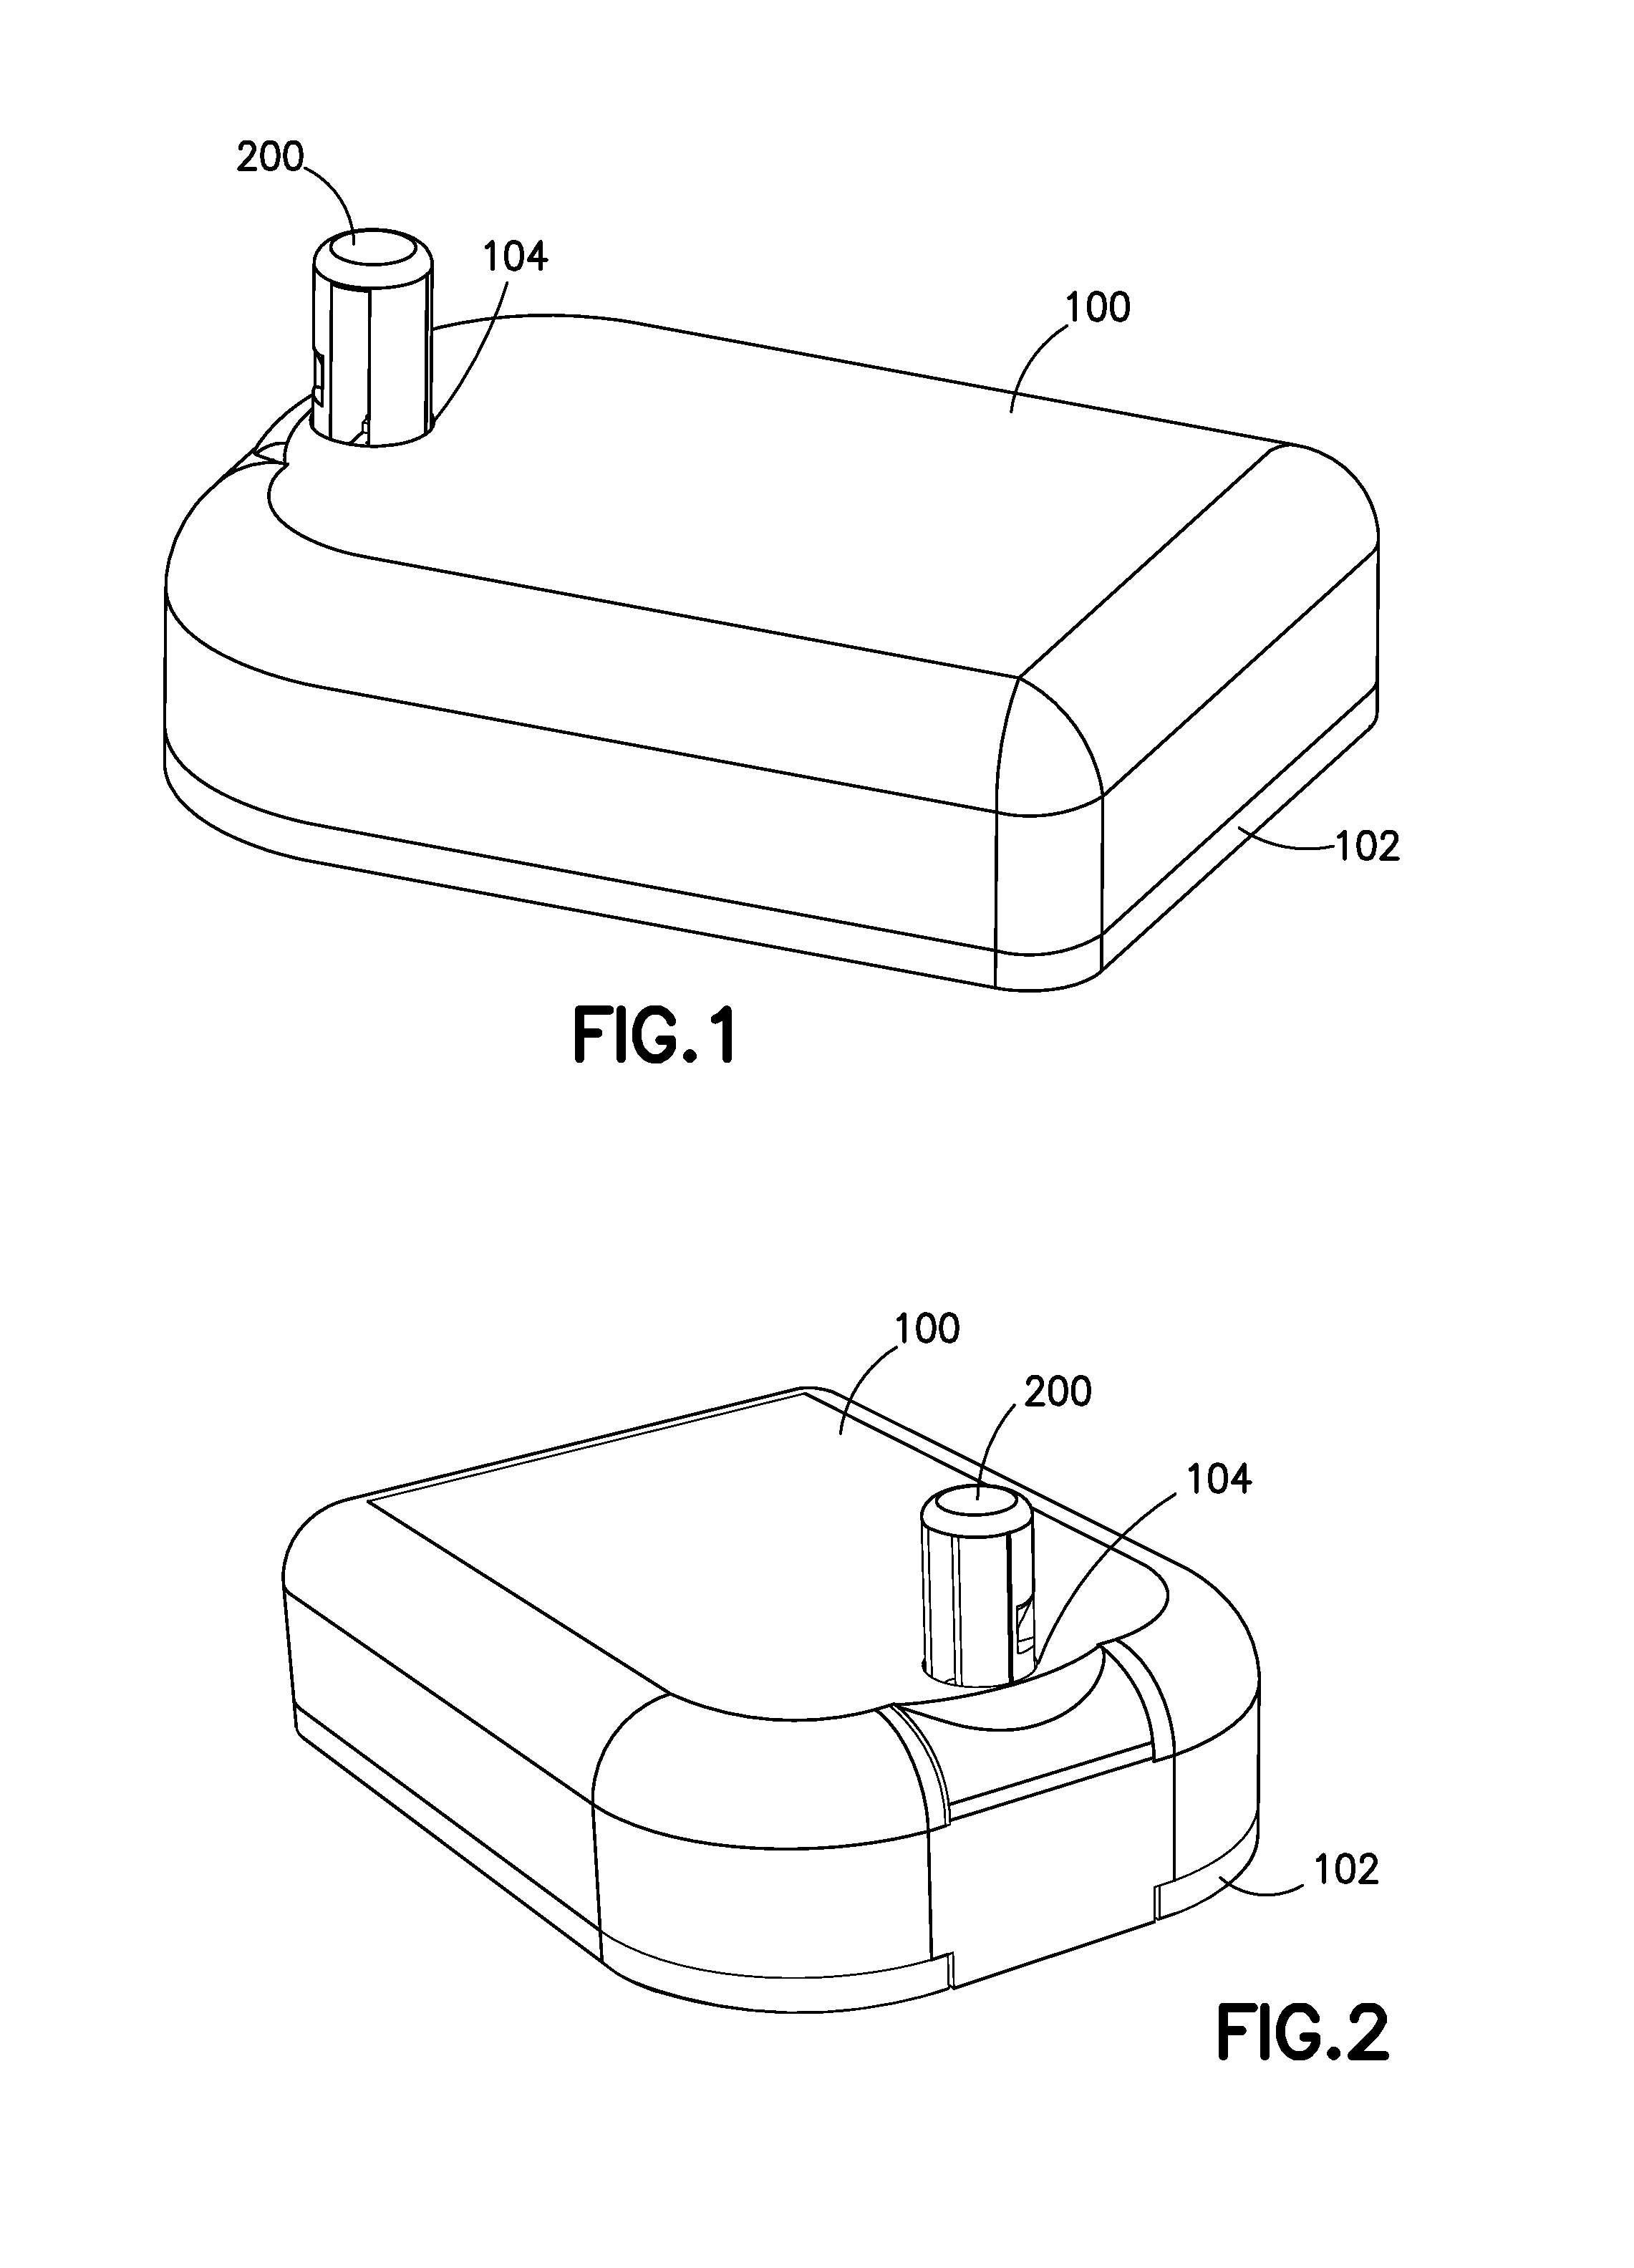 Catheter Insertion Device And Method of Inserting a Catheter